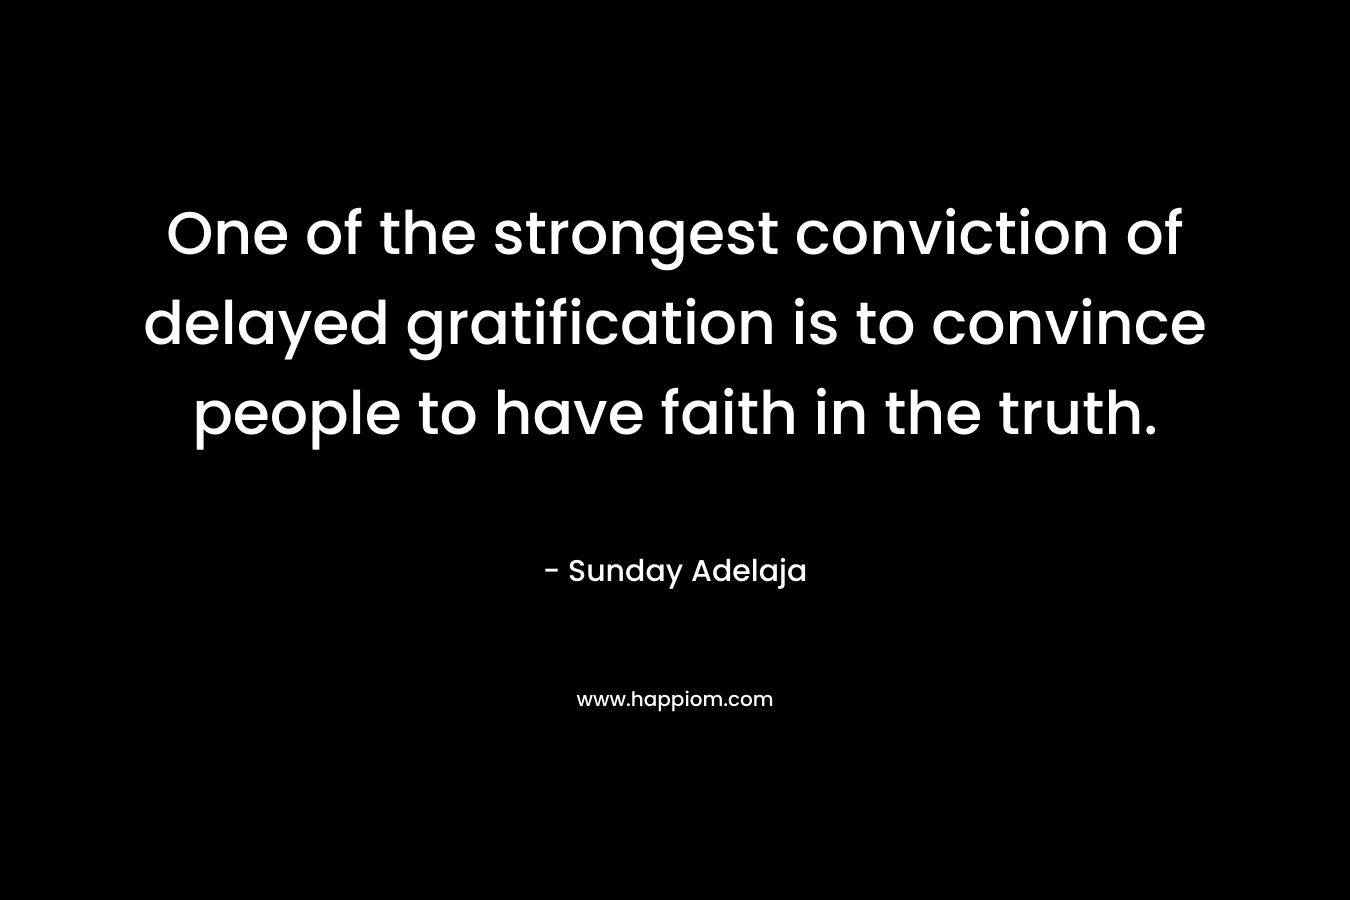 One of the strongest conviction of delayed gratification is to convince people to have faith in the truth. – Sunday Adelaja